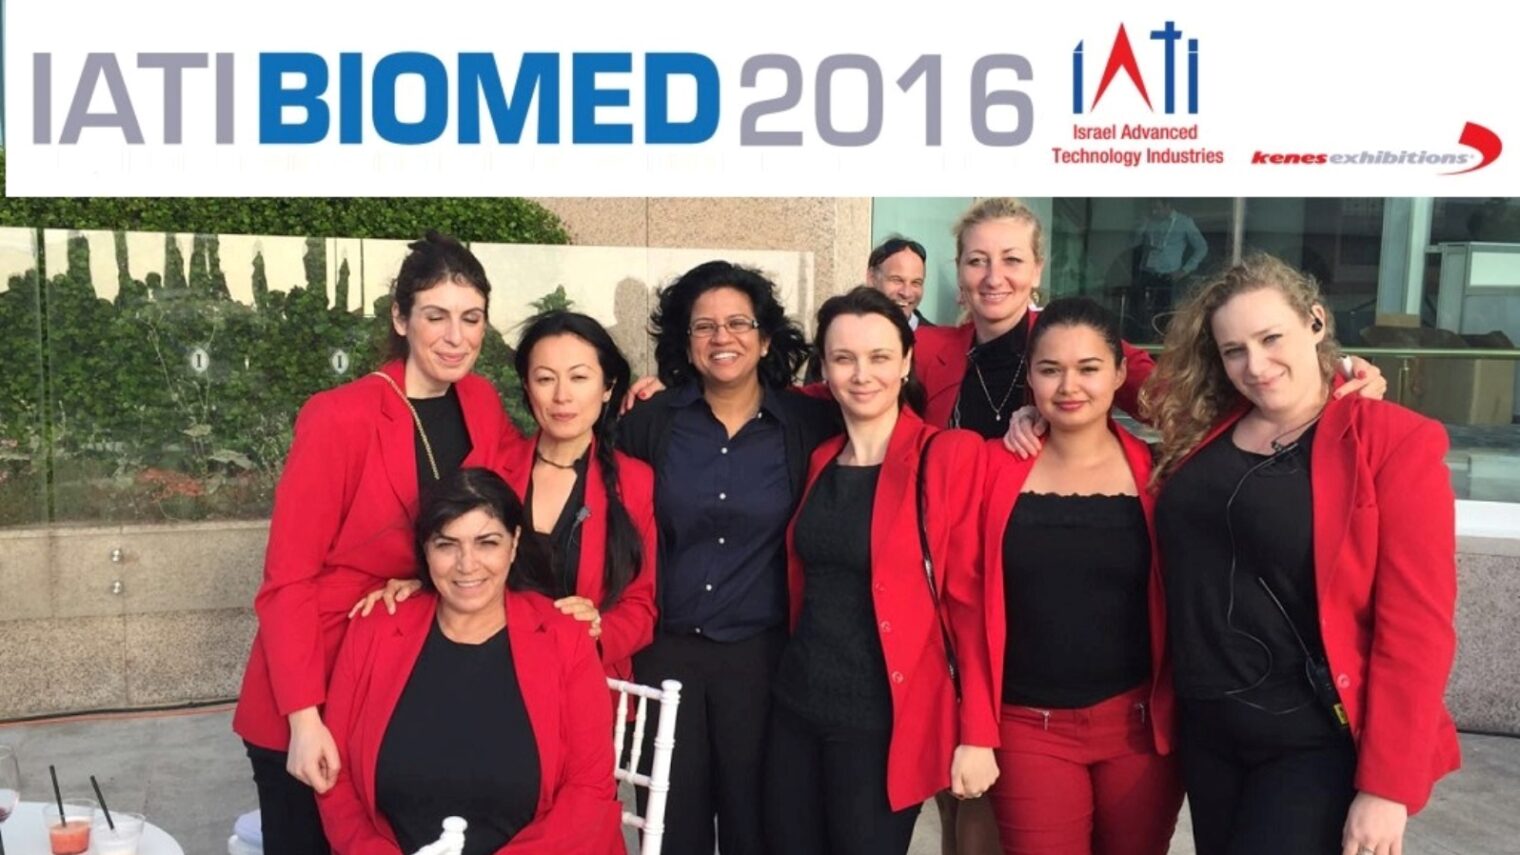 The IATI Biomed staff preparing to greet thousands of international visitors at the 2016 conference in Tel Aviv. Photo: courtesy